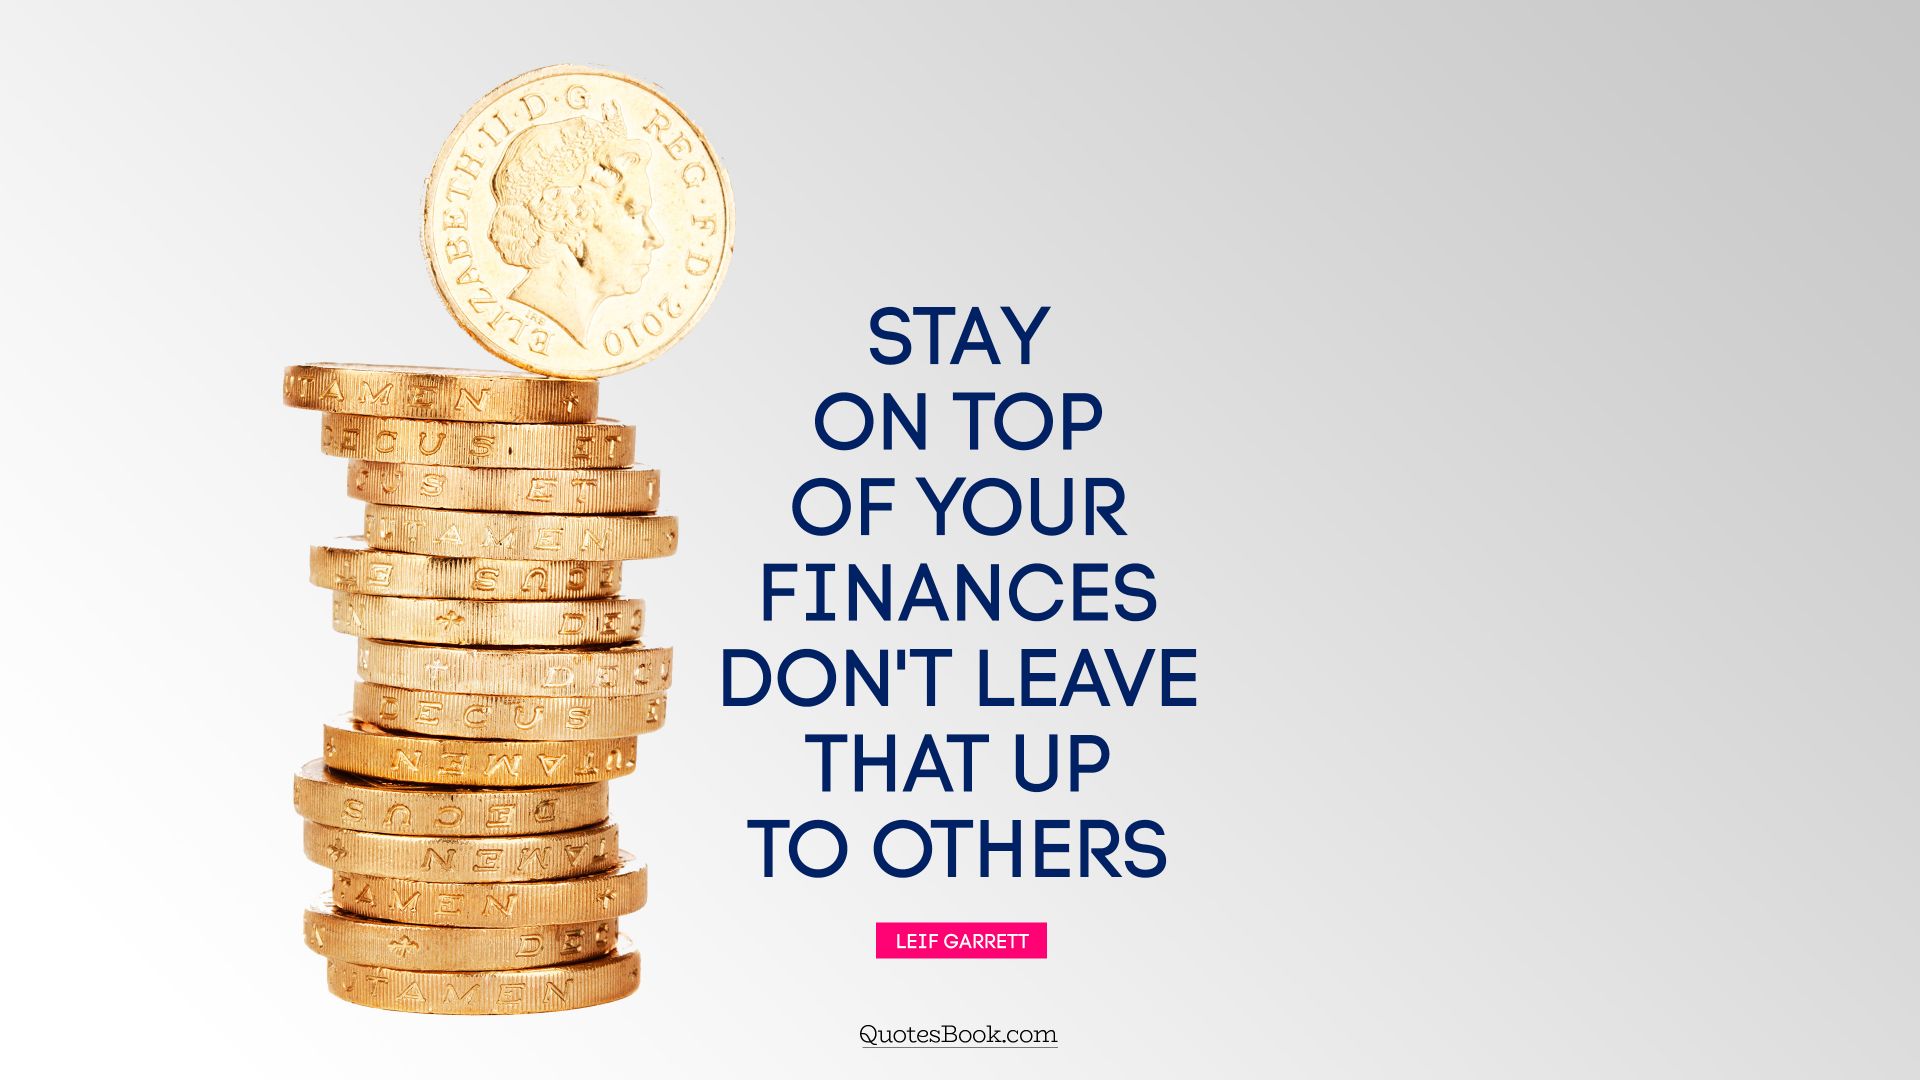 Stay on top of your finances. Don't leave that up to others. - Quote by Leif Garrett